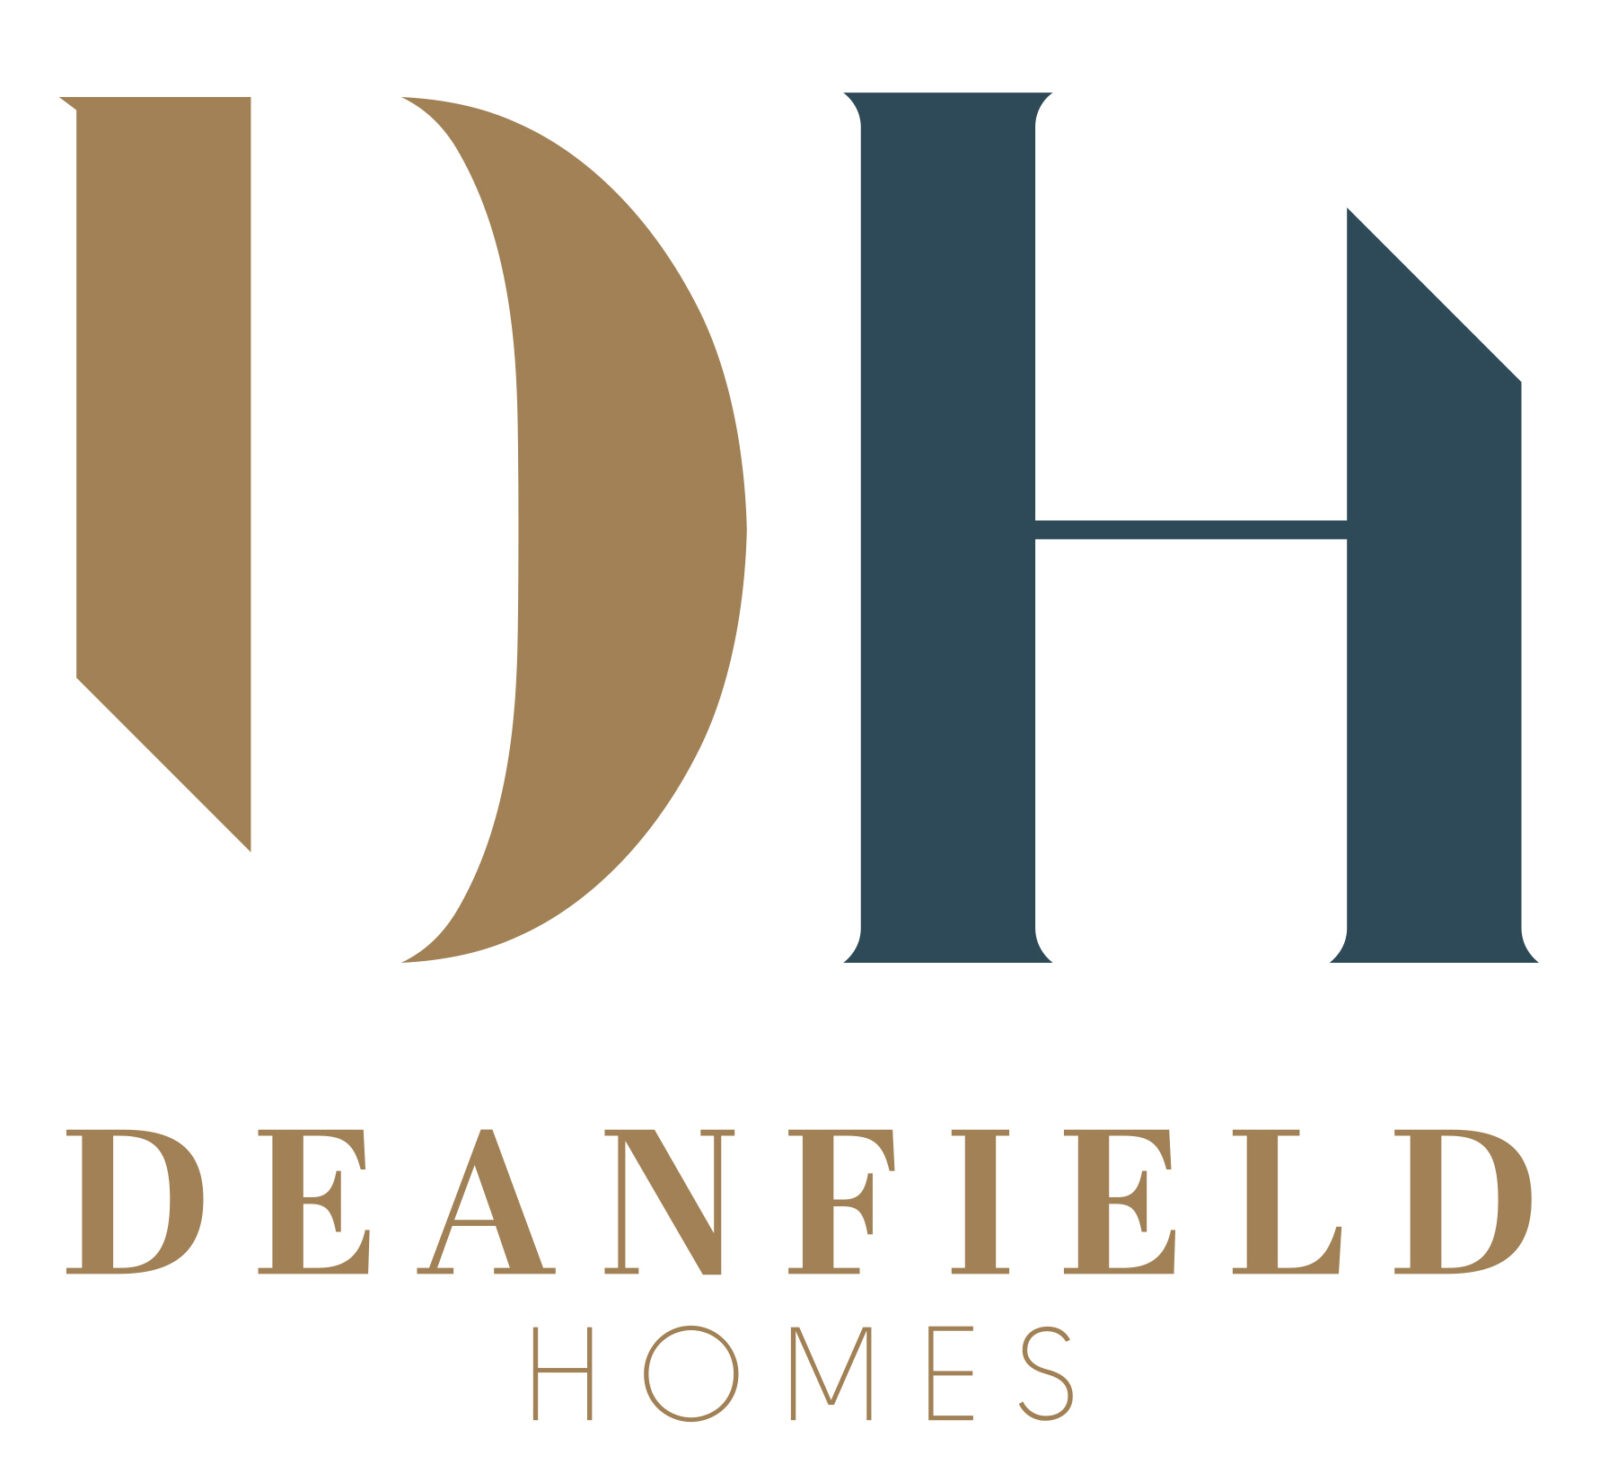 We would like to welcome Deanfield Homes to ContactBuilder